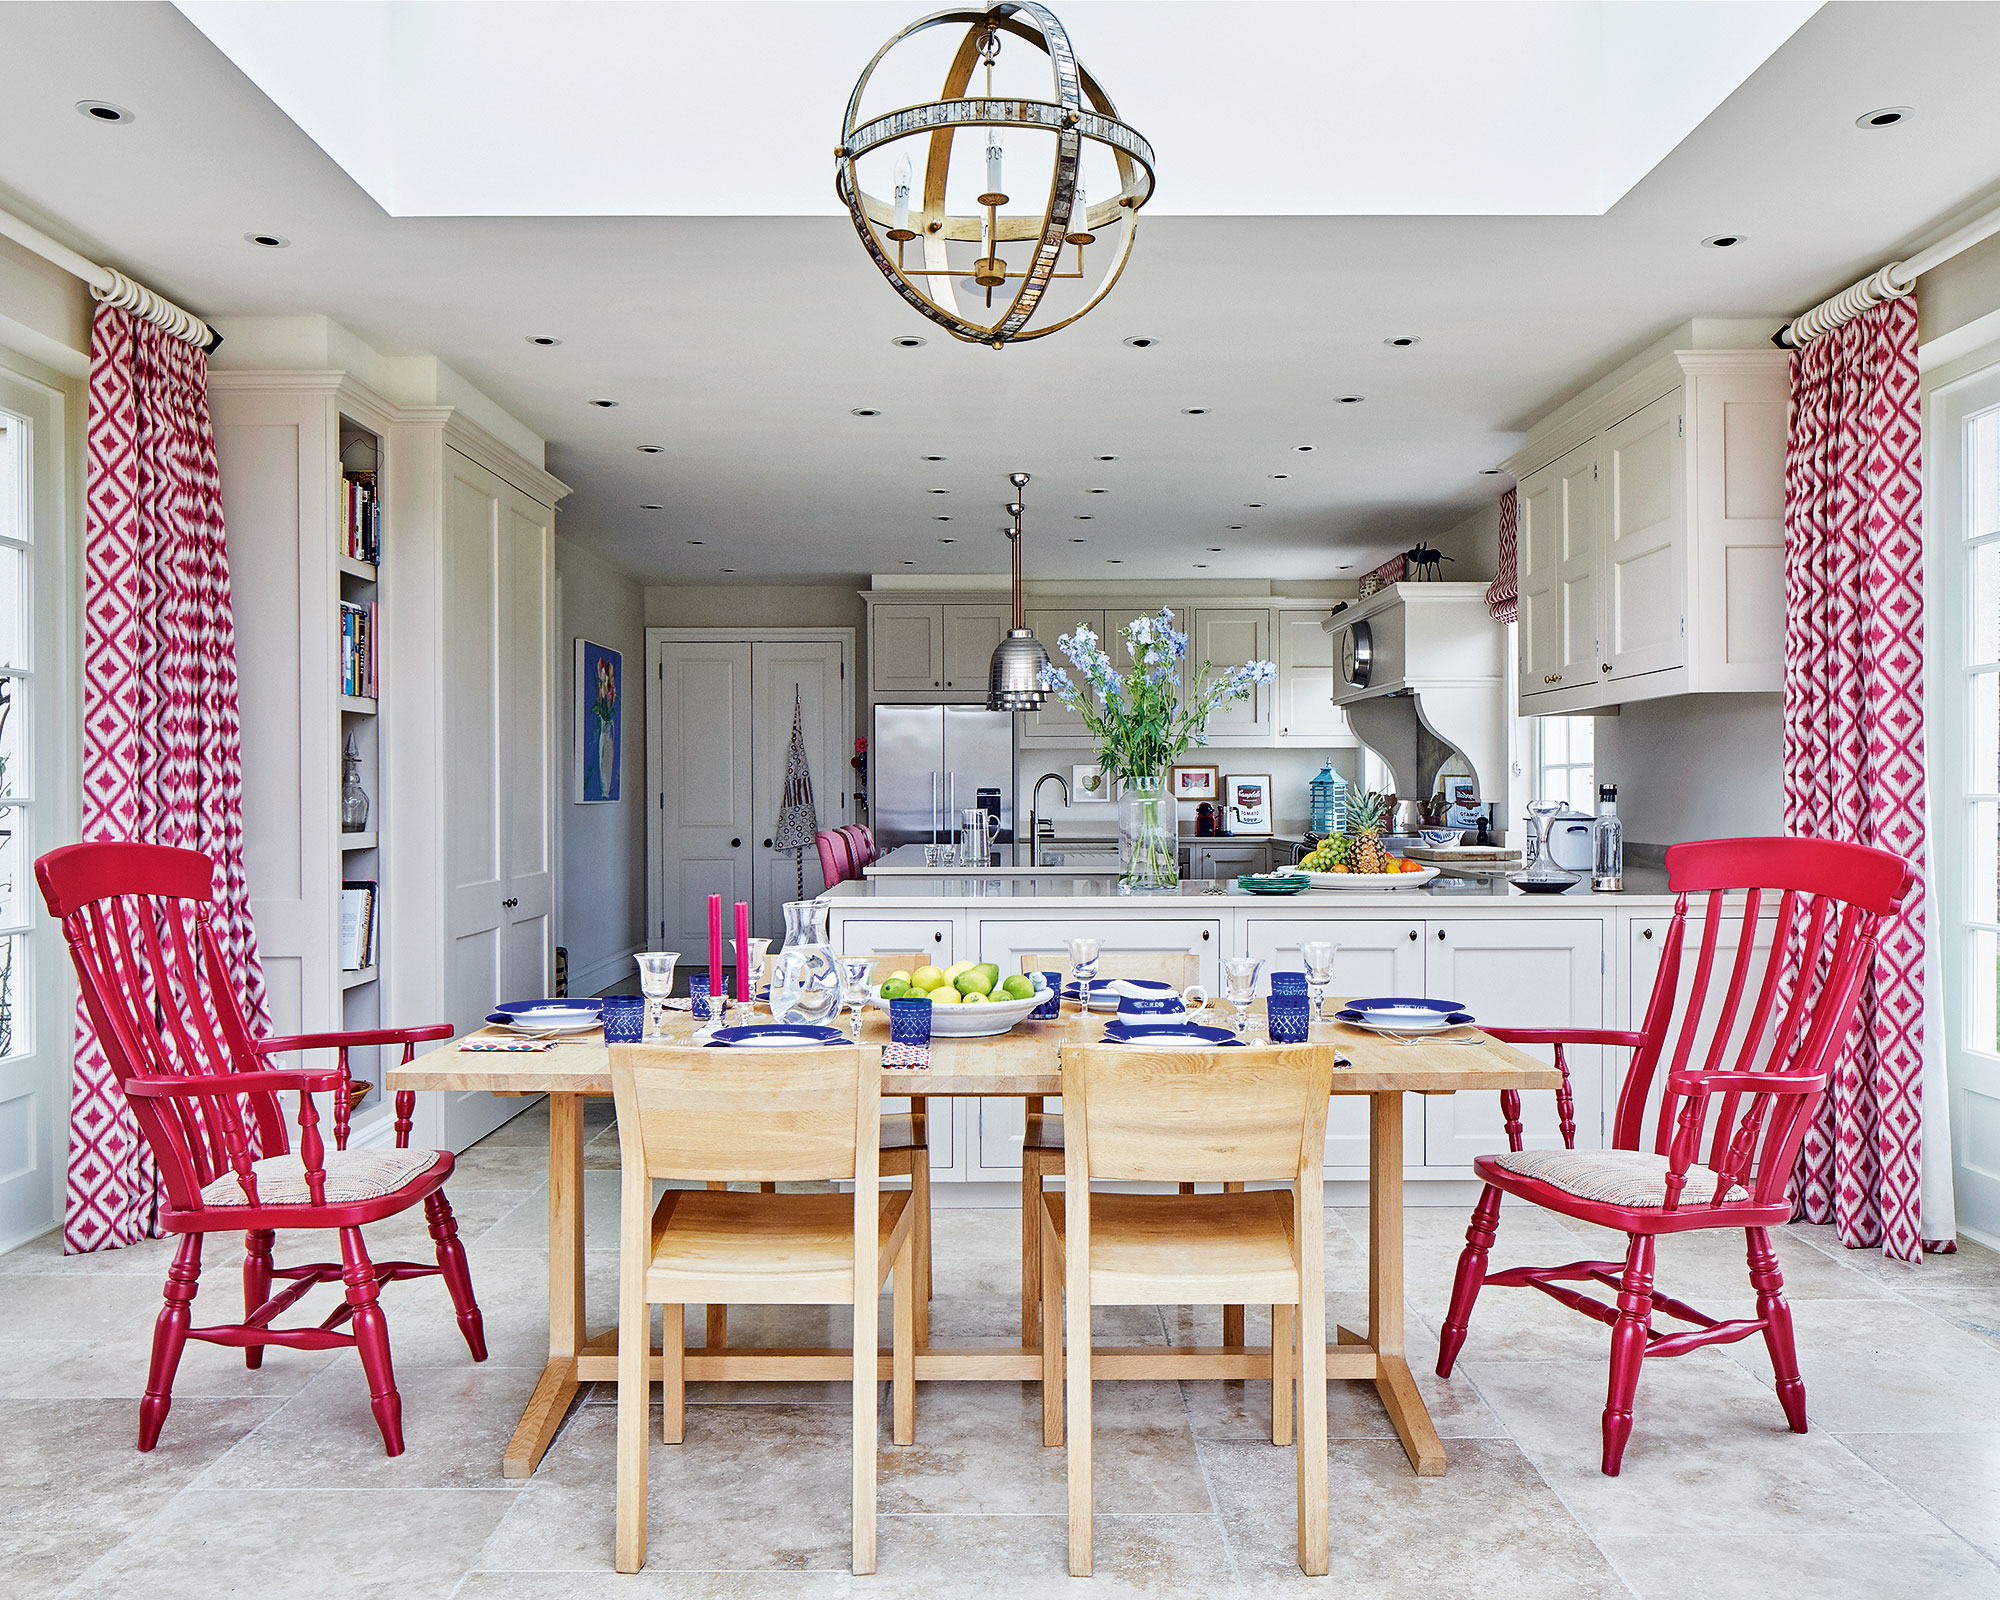 Red kitchen ideas: 10 ways to use this bold shade elegantly